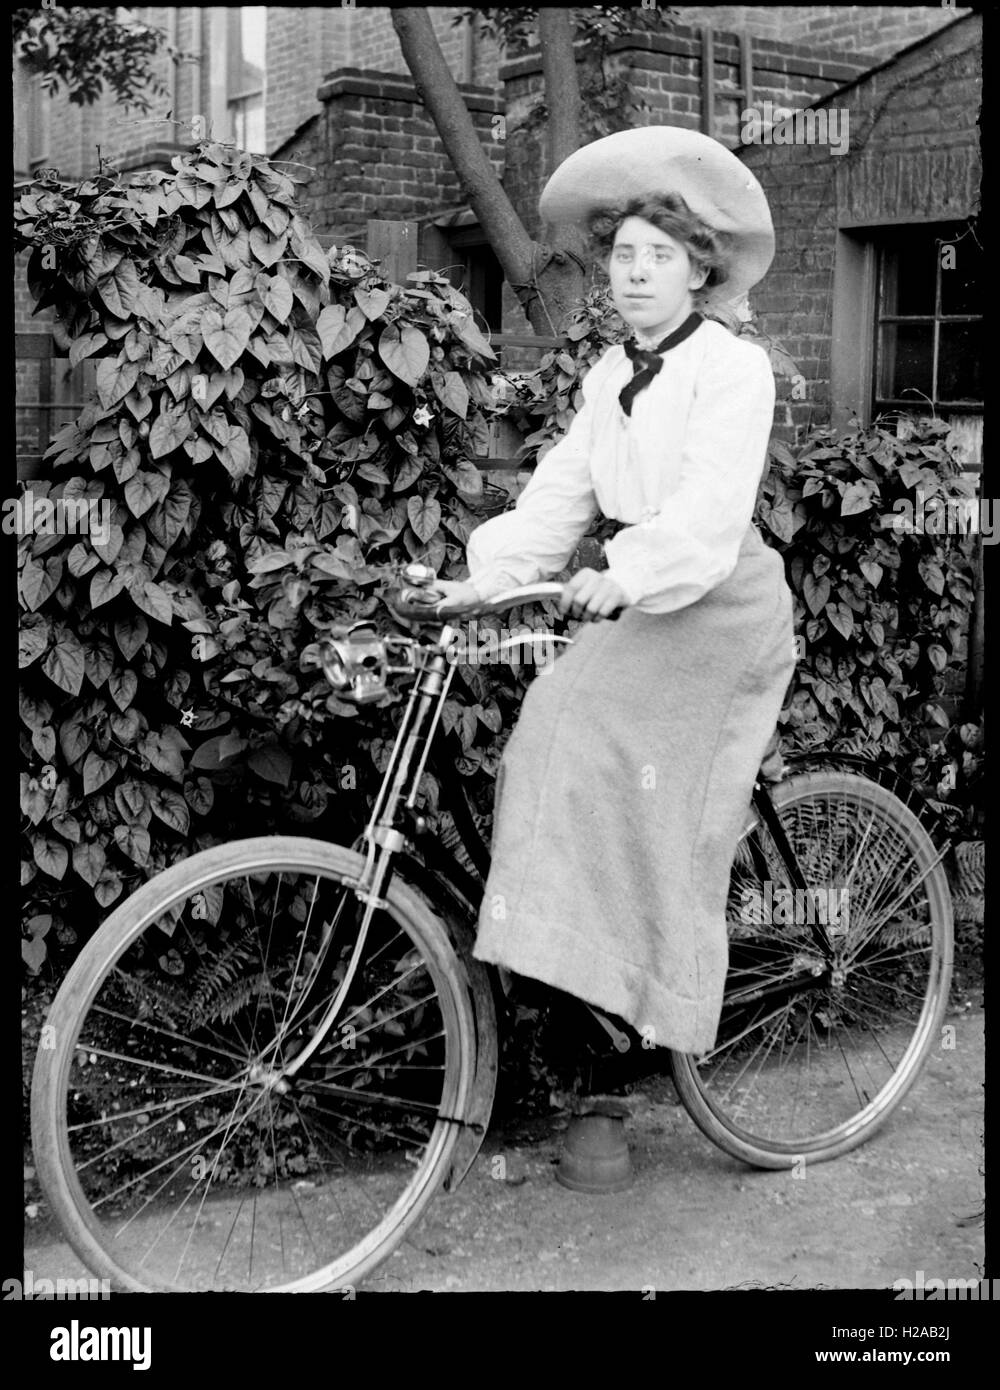 Woman on bicycle c1910. Photo by Tony Henshaw Stock Photo